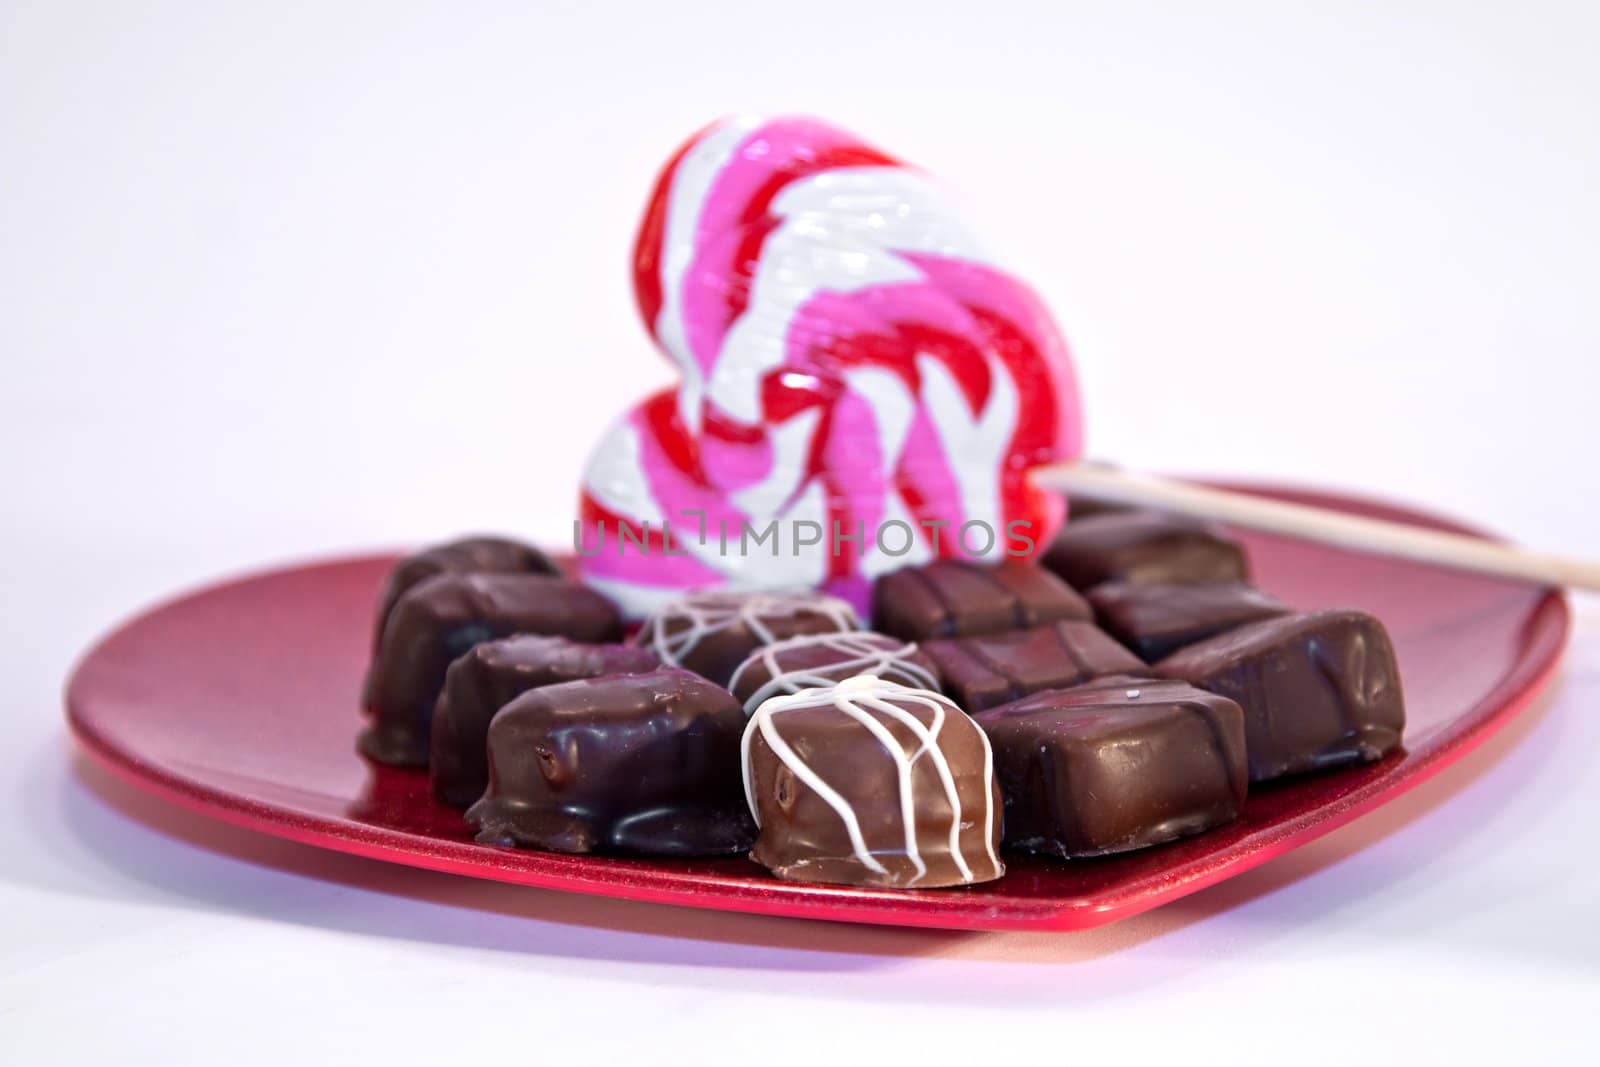 A variety of chocolates with a heart shaped lollipop on a red metallic heart plate isolated on white